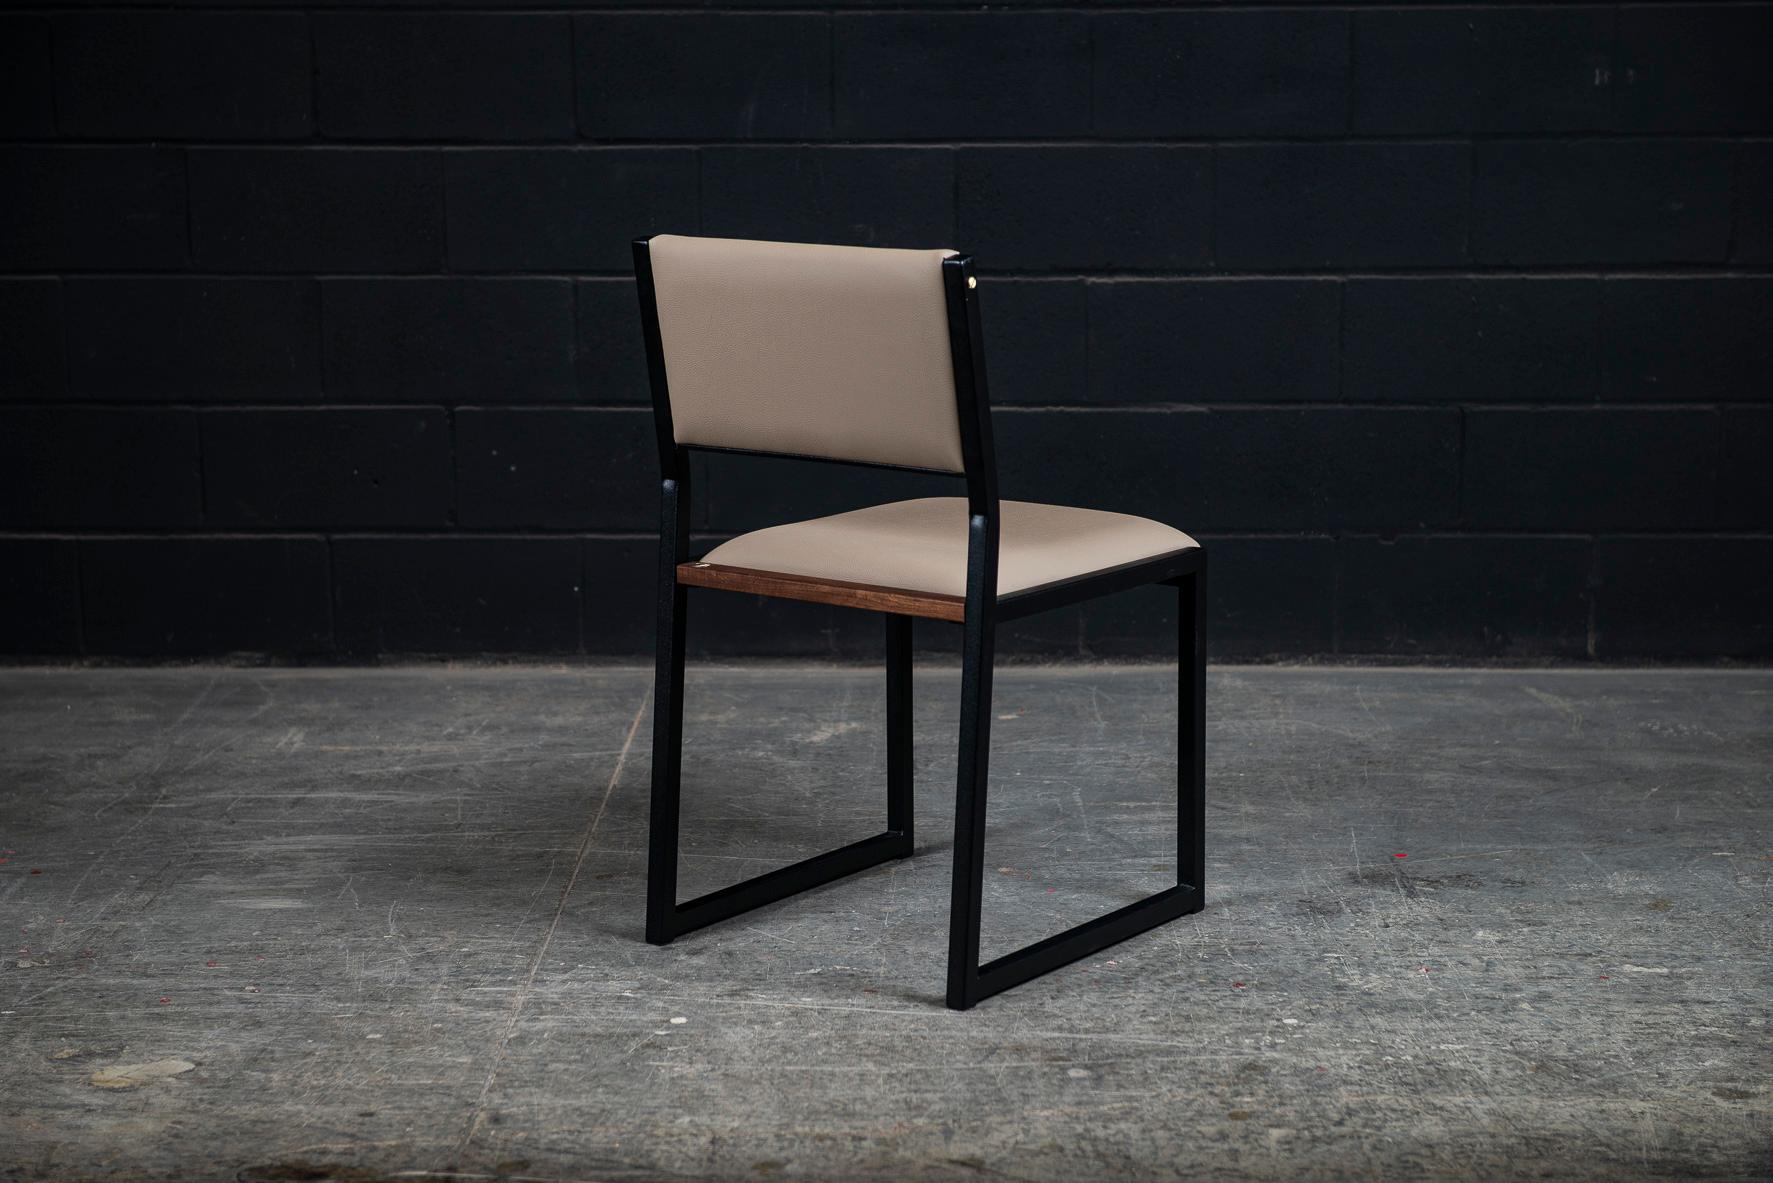 Here's a set of 8 shaker modern dining chair. They are handmade to order from our unique Ambrozia black textured steel tubing frame with a premium vinyl upholstered seat and back. We have a large variety of vinyl colors & leather in option. Also